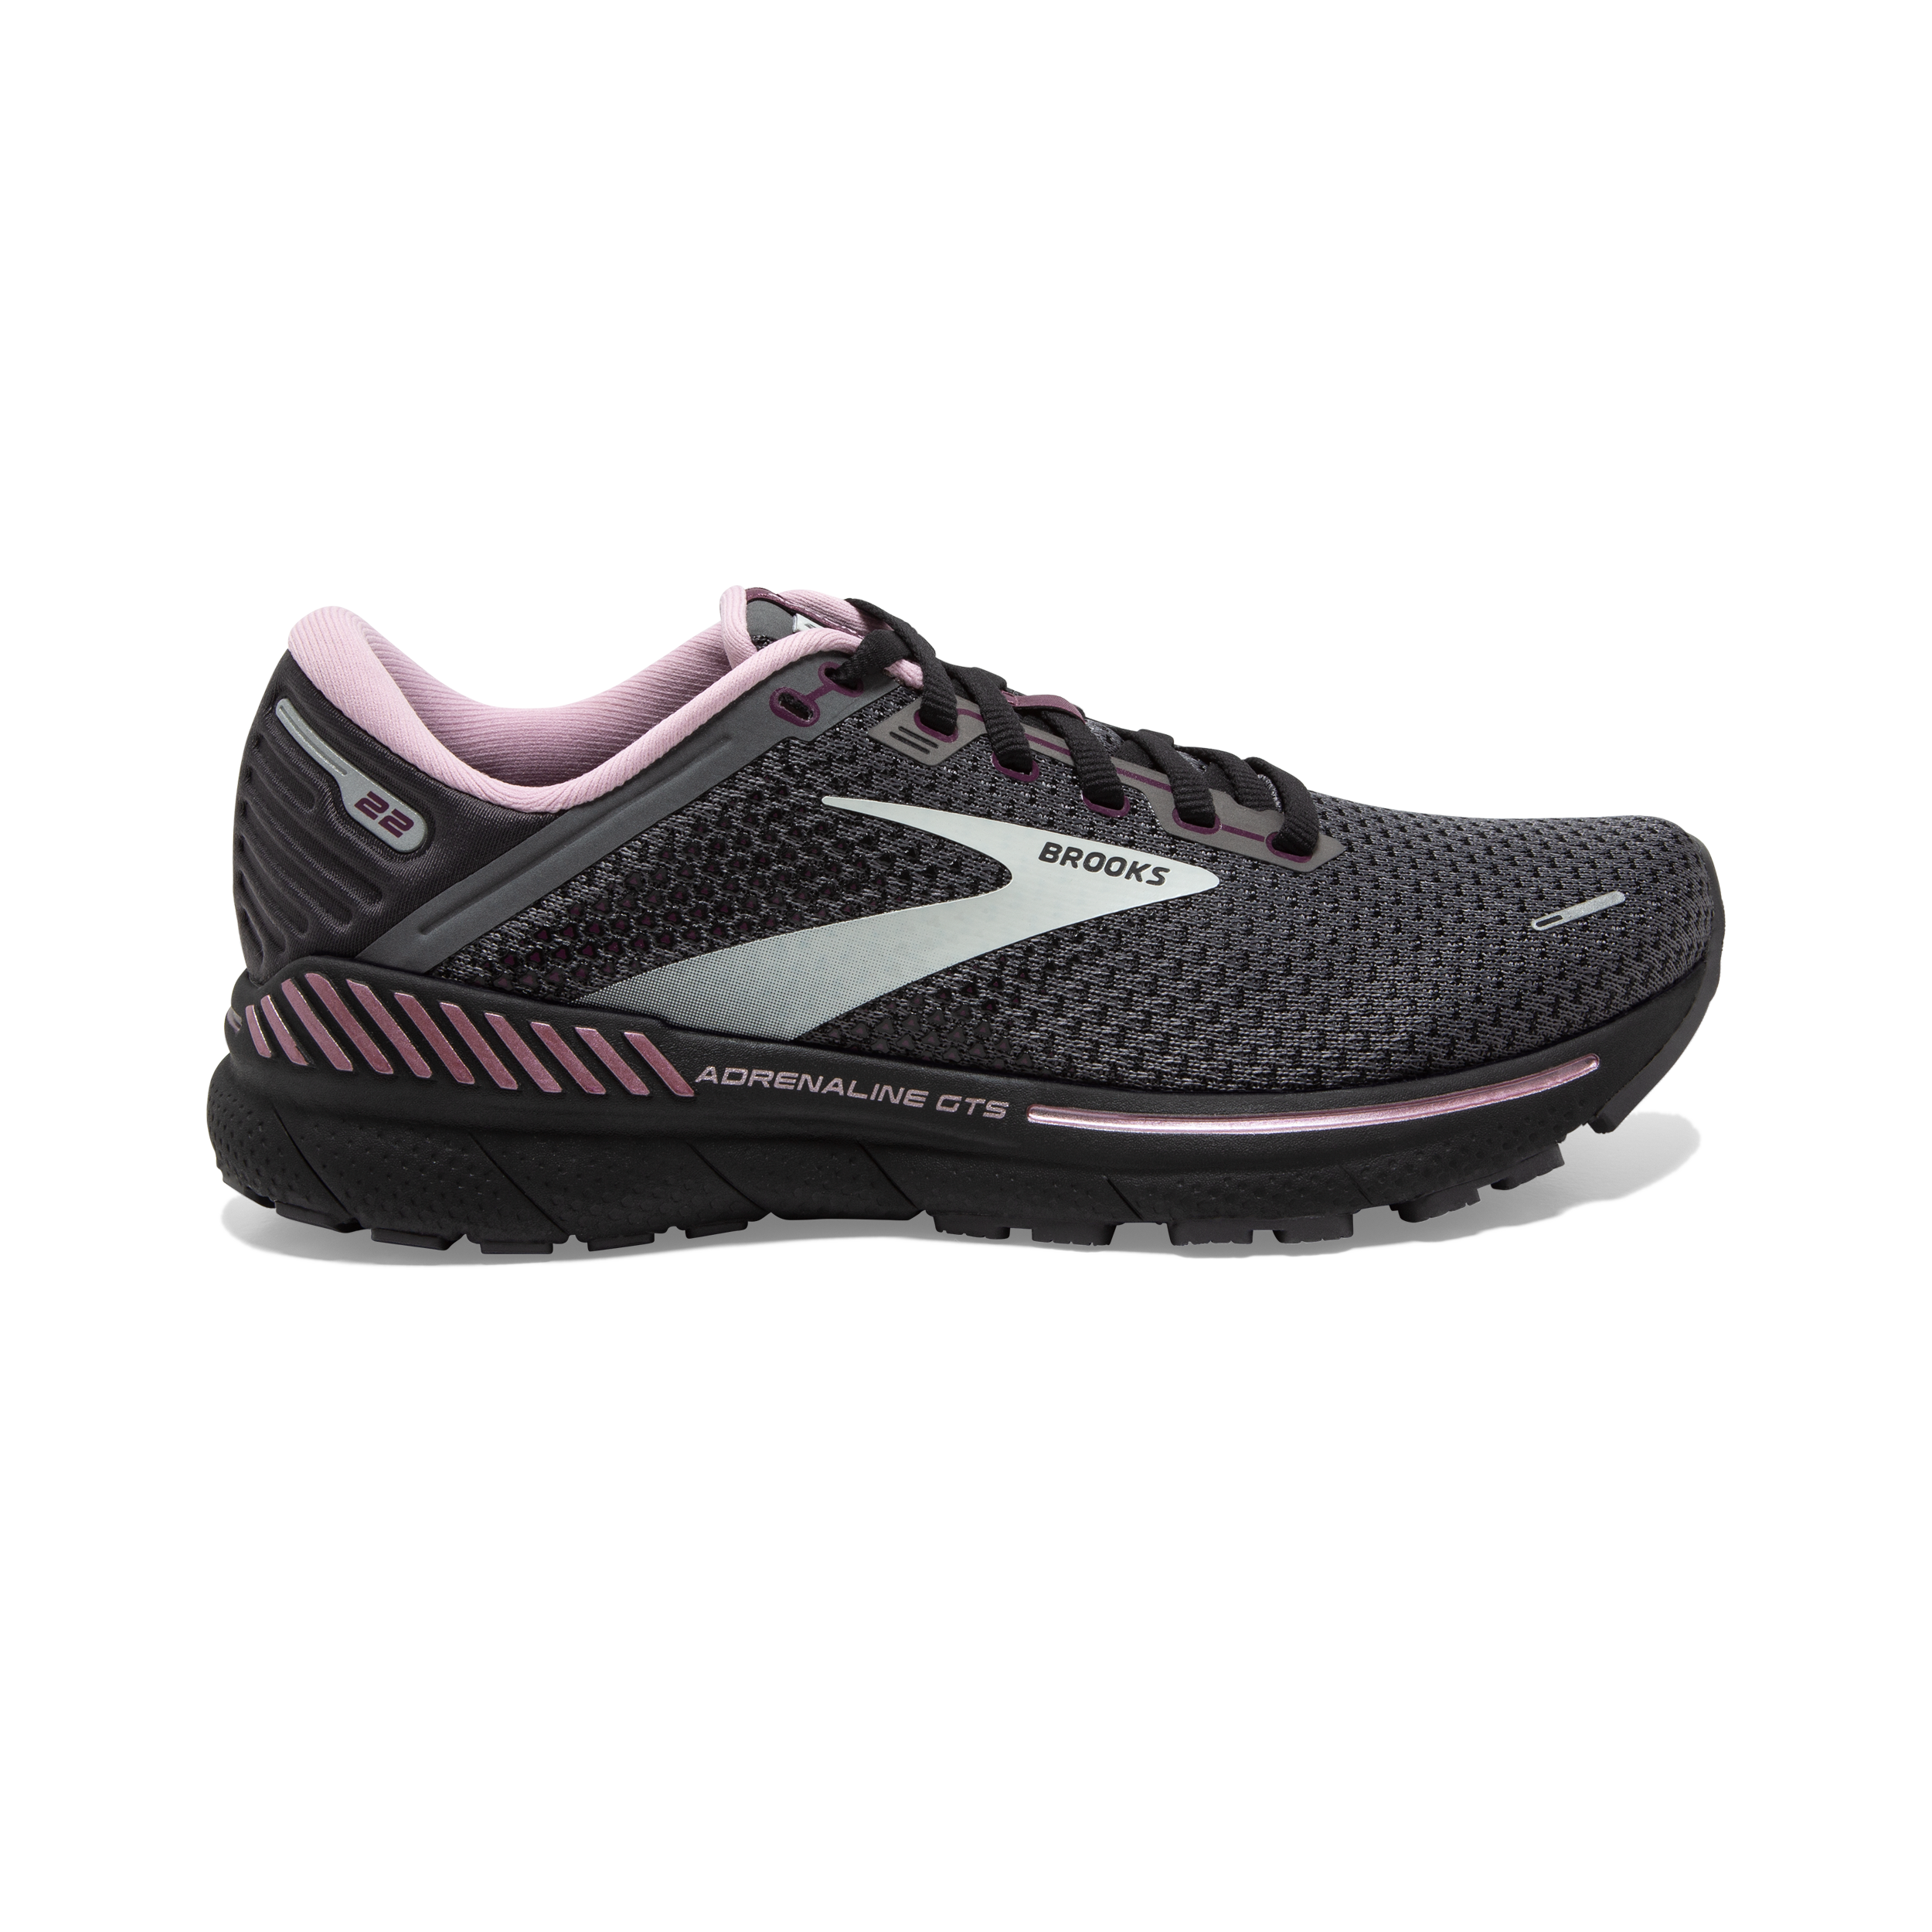 Where to Buy Brooks Shoes Cheap?